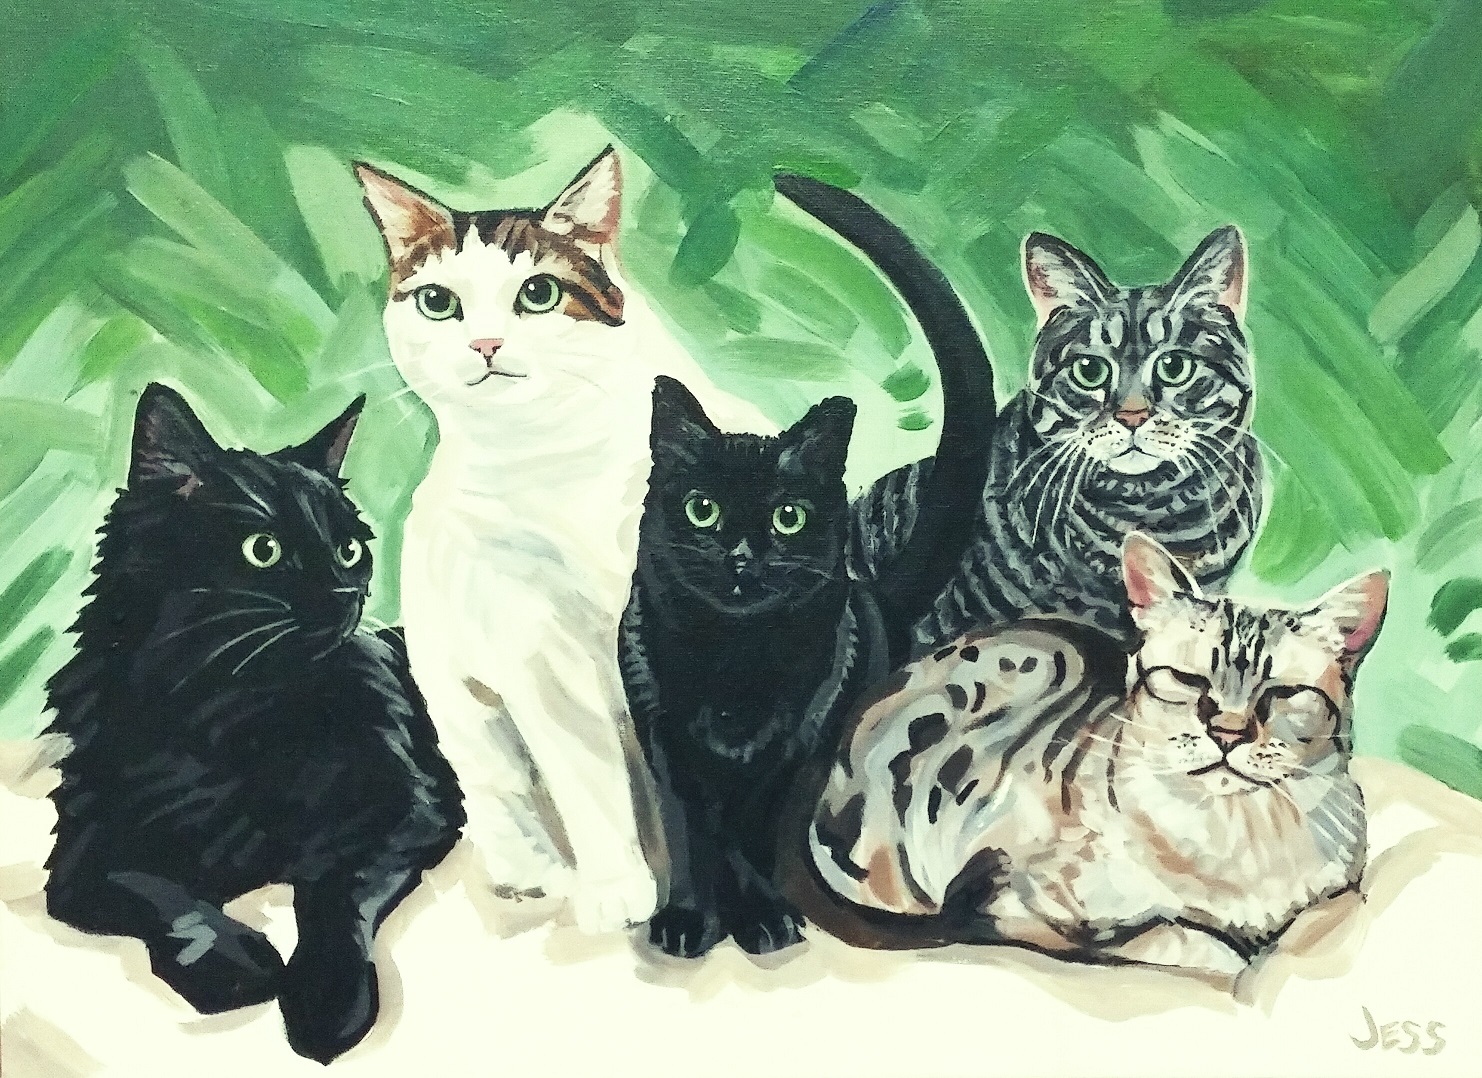 Family of Cats, oil on canvas, 24x36 in, Jessica Siemens 2015